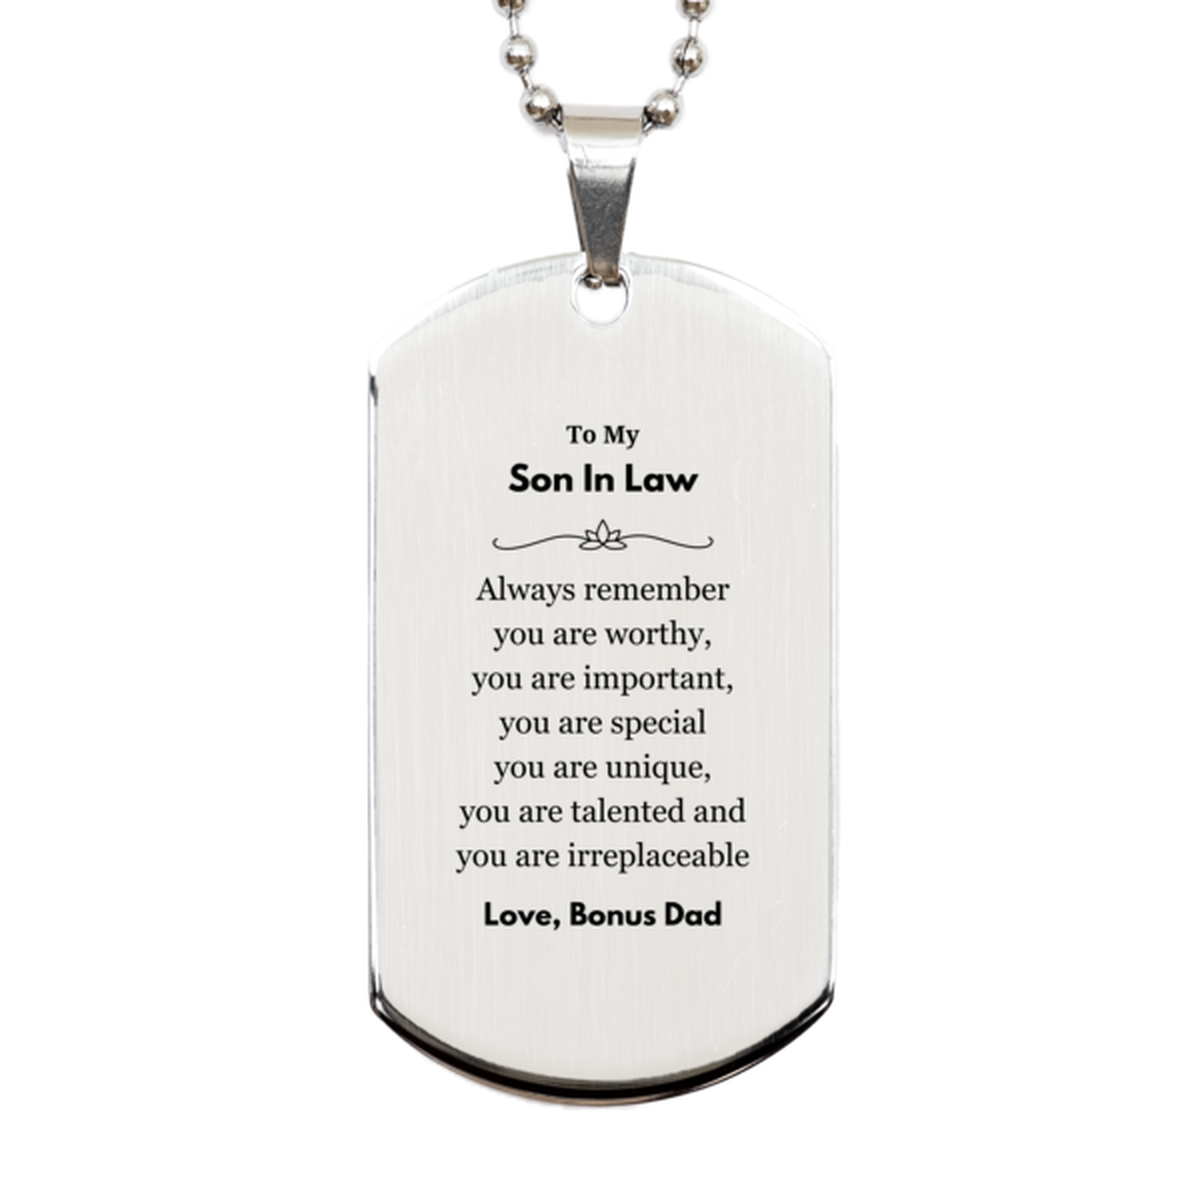 Son In Law Birthday Gifts from Bonus Dad, Inspirational Silver Dog Tag for Son In Law Christmas Graduation Gifts for Son In Law Always remember you are worthy, you are important. Love, Bonus Dad